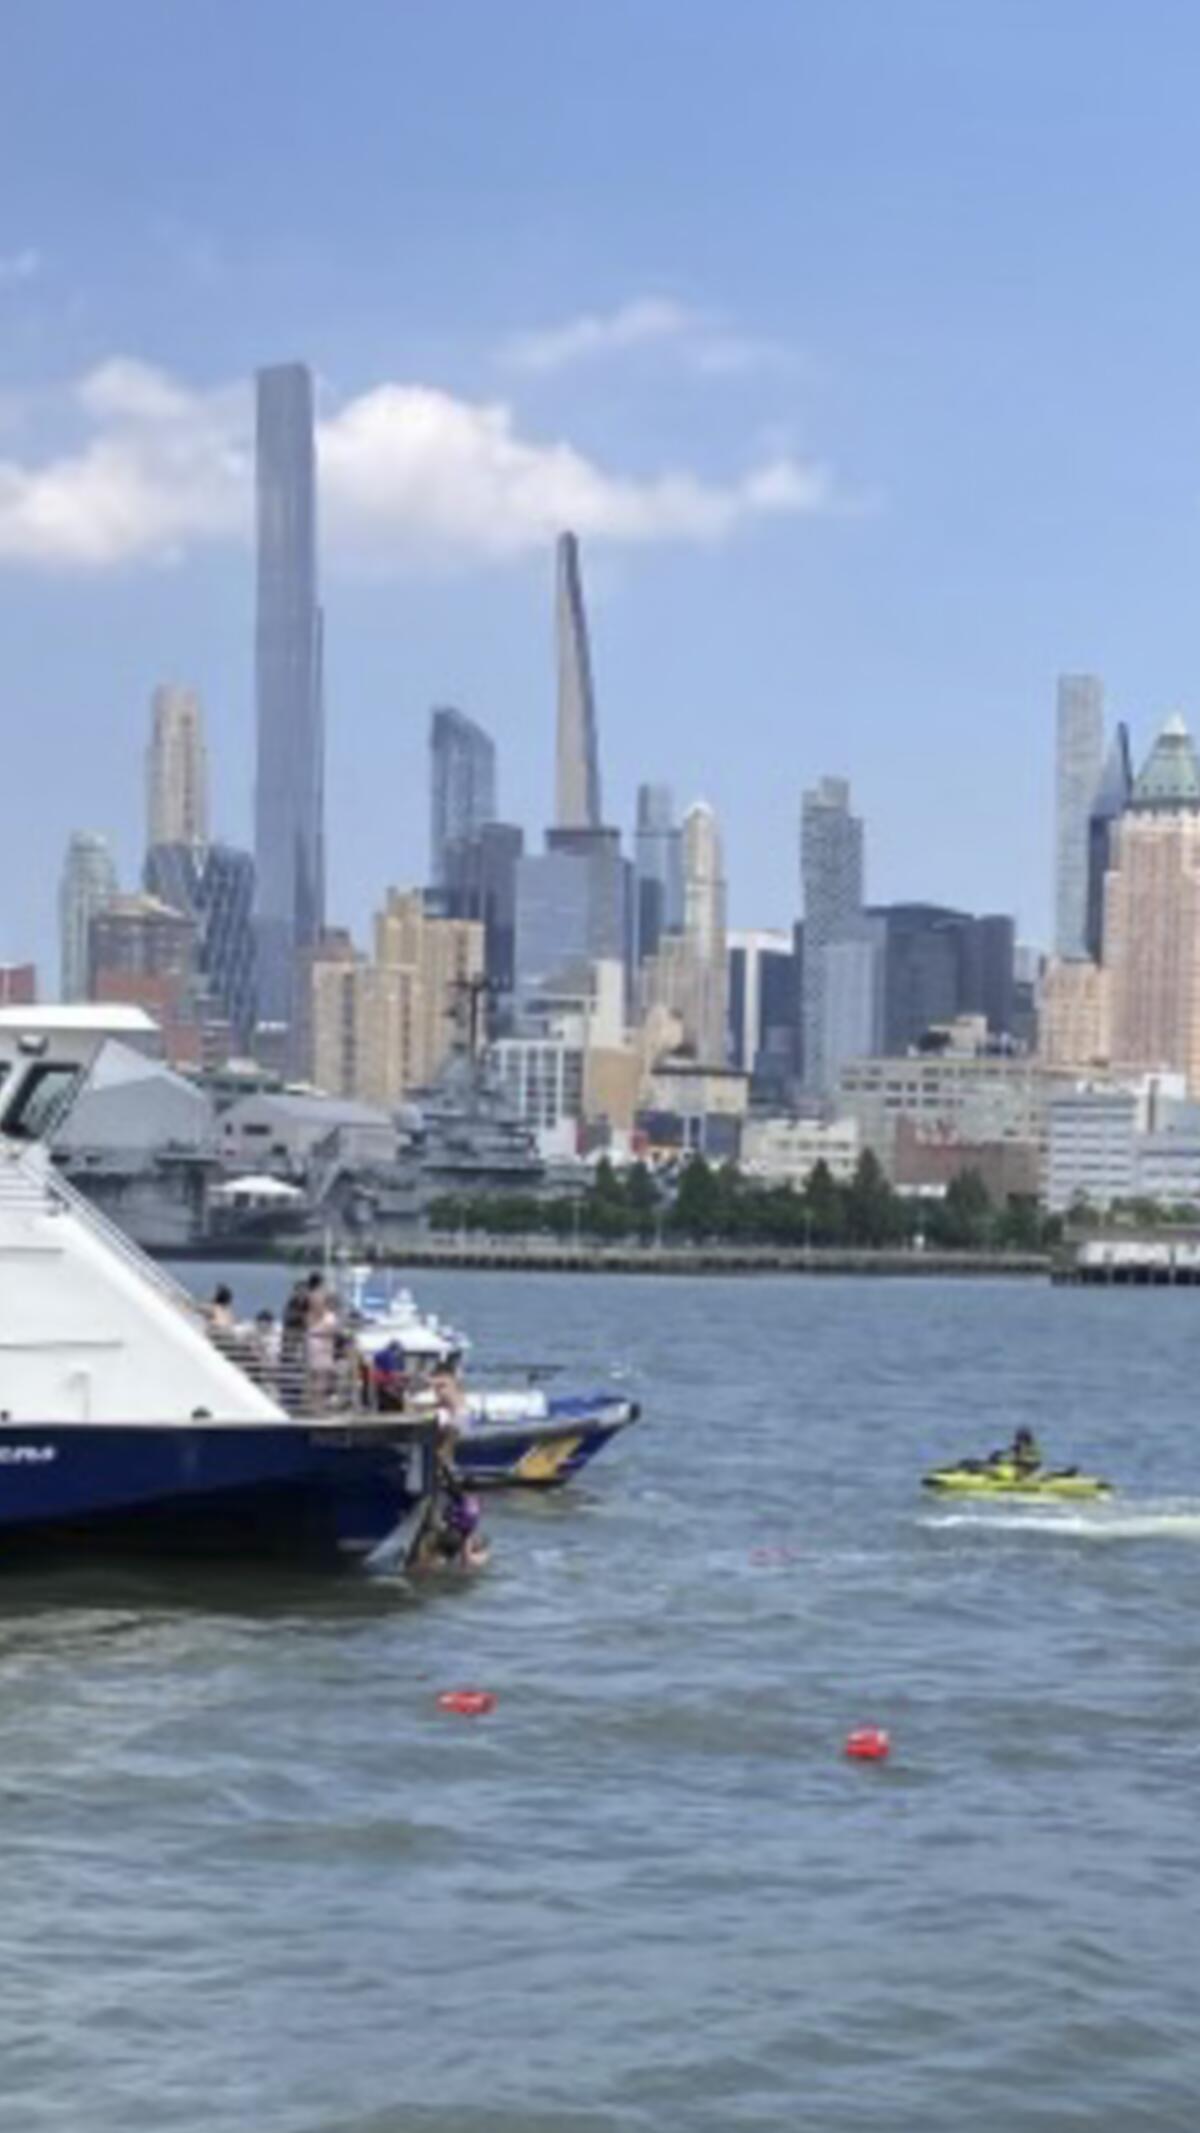 This photo provided by NY Waterway shows ferry personnel making rescue of individuals after a boat capsized in the Hudson River on Tuesday, July 12, 2022, in New York. (NY Waterway via AP)